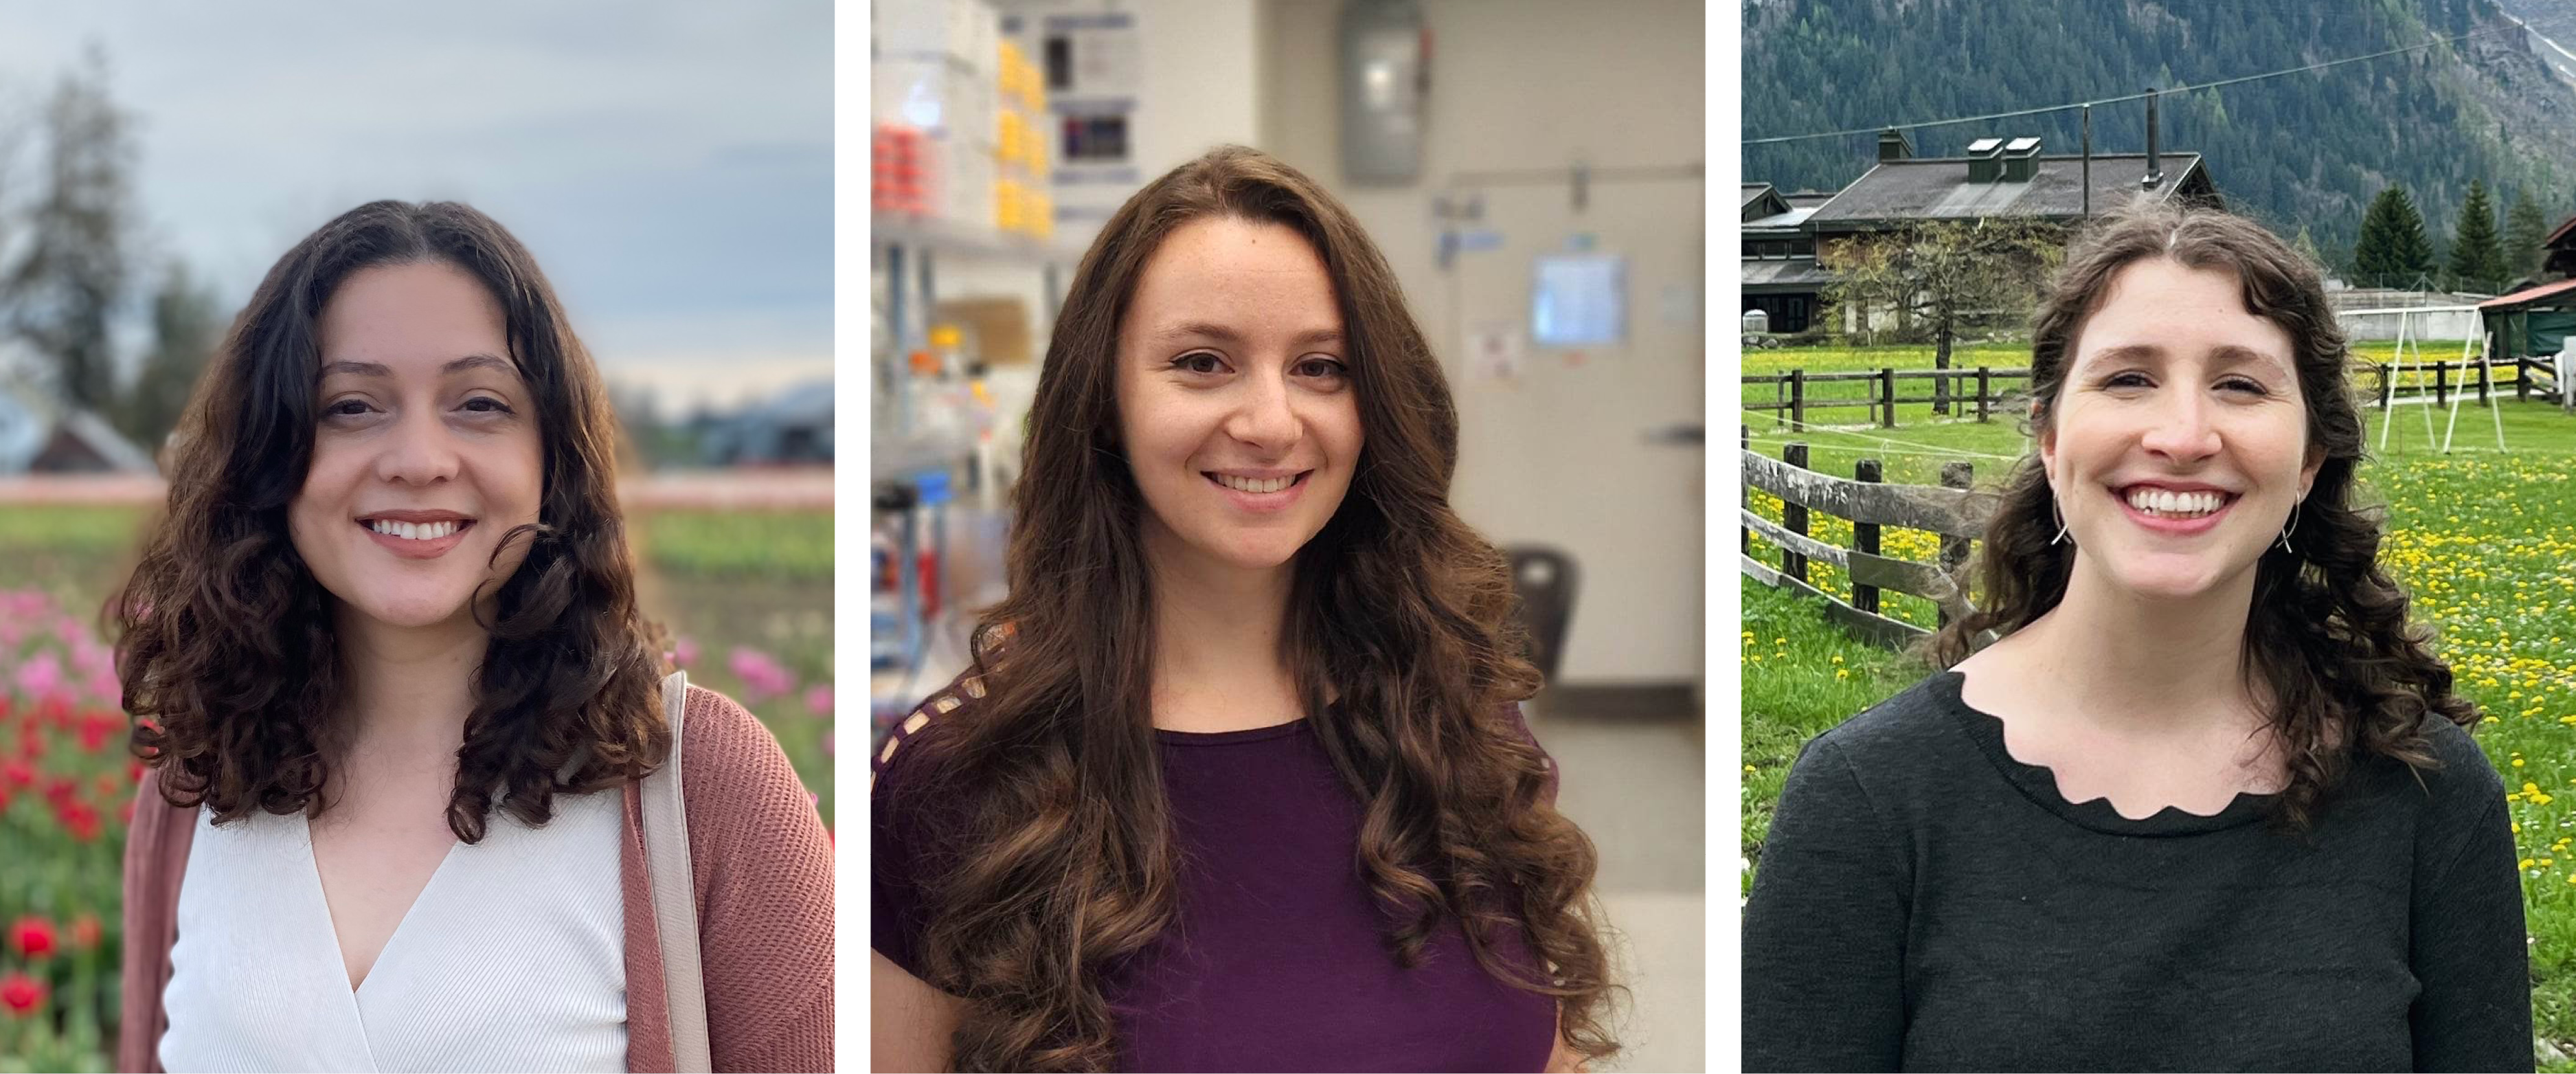 2023 Lacroute Fellows, from left: Yessica Santana Agreda, Arielle Isakharov and Elizabeth Rose